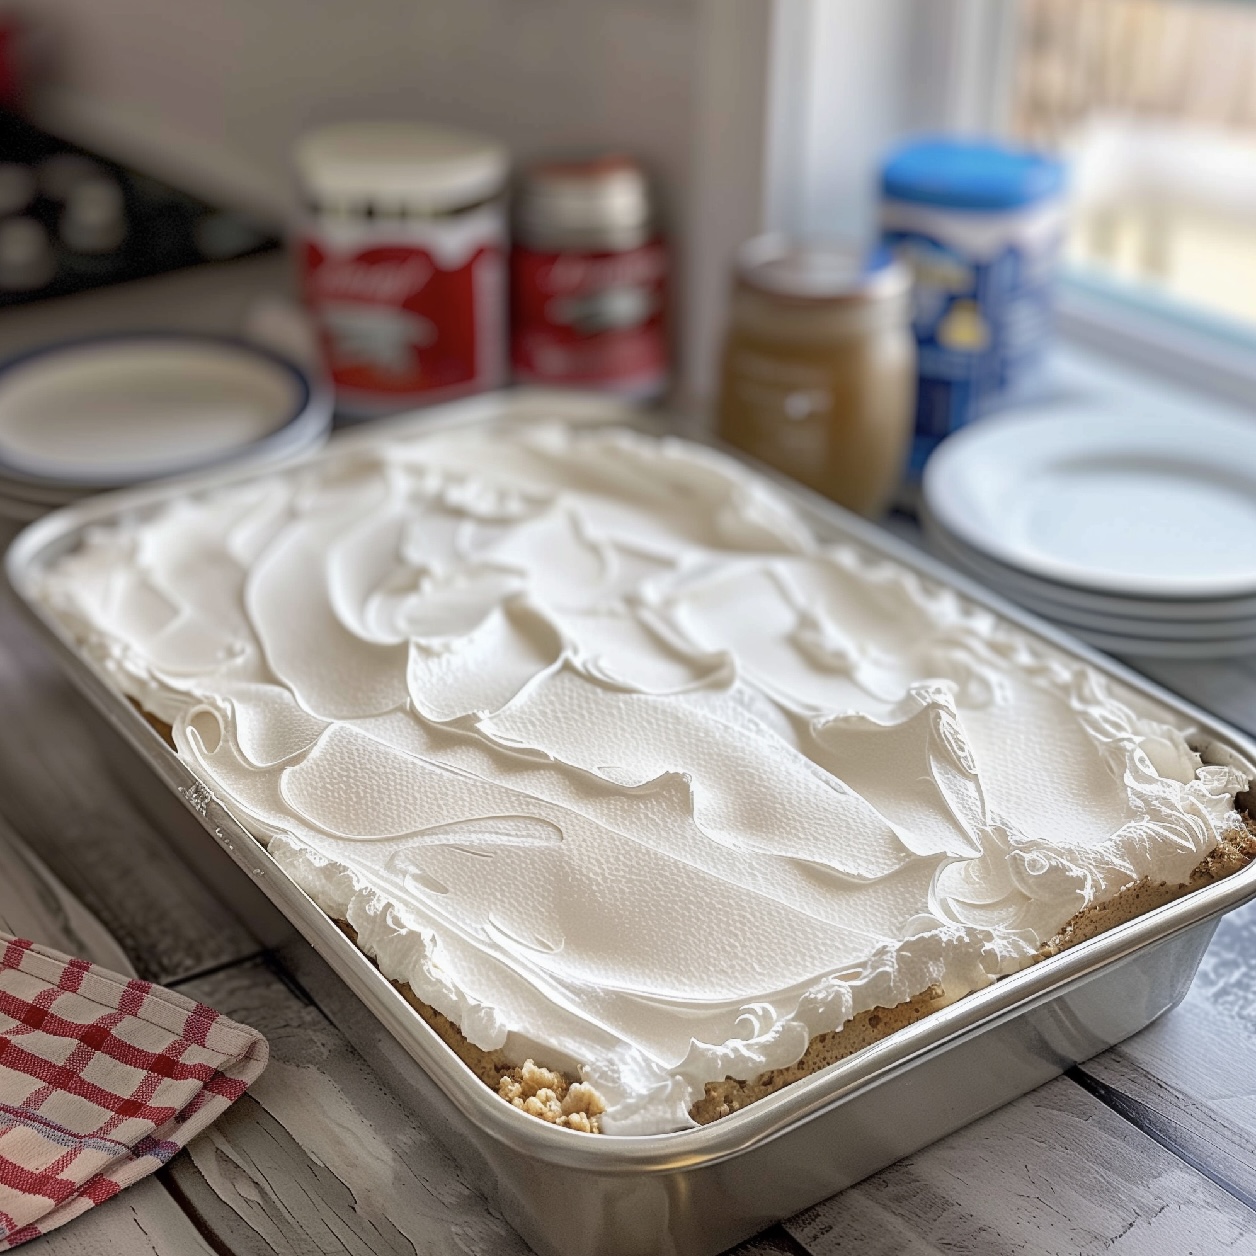 Bring back fond memories and create new ones with our cherished family Cream Cheese Cake recipe. A taste of home in every bite!